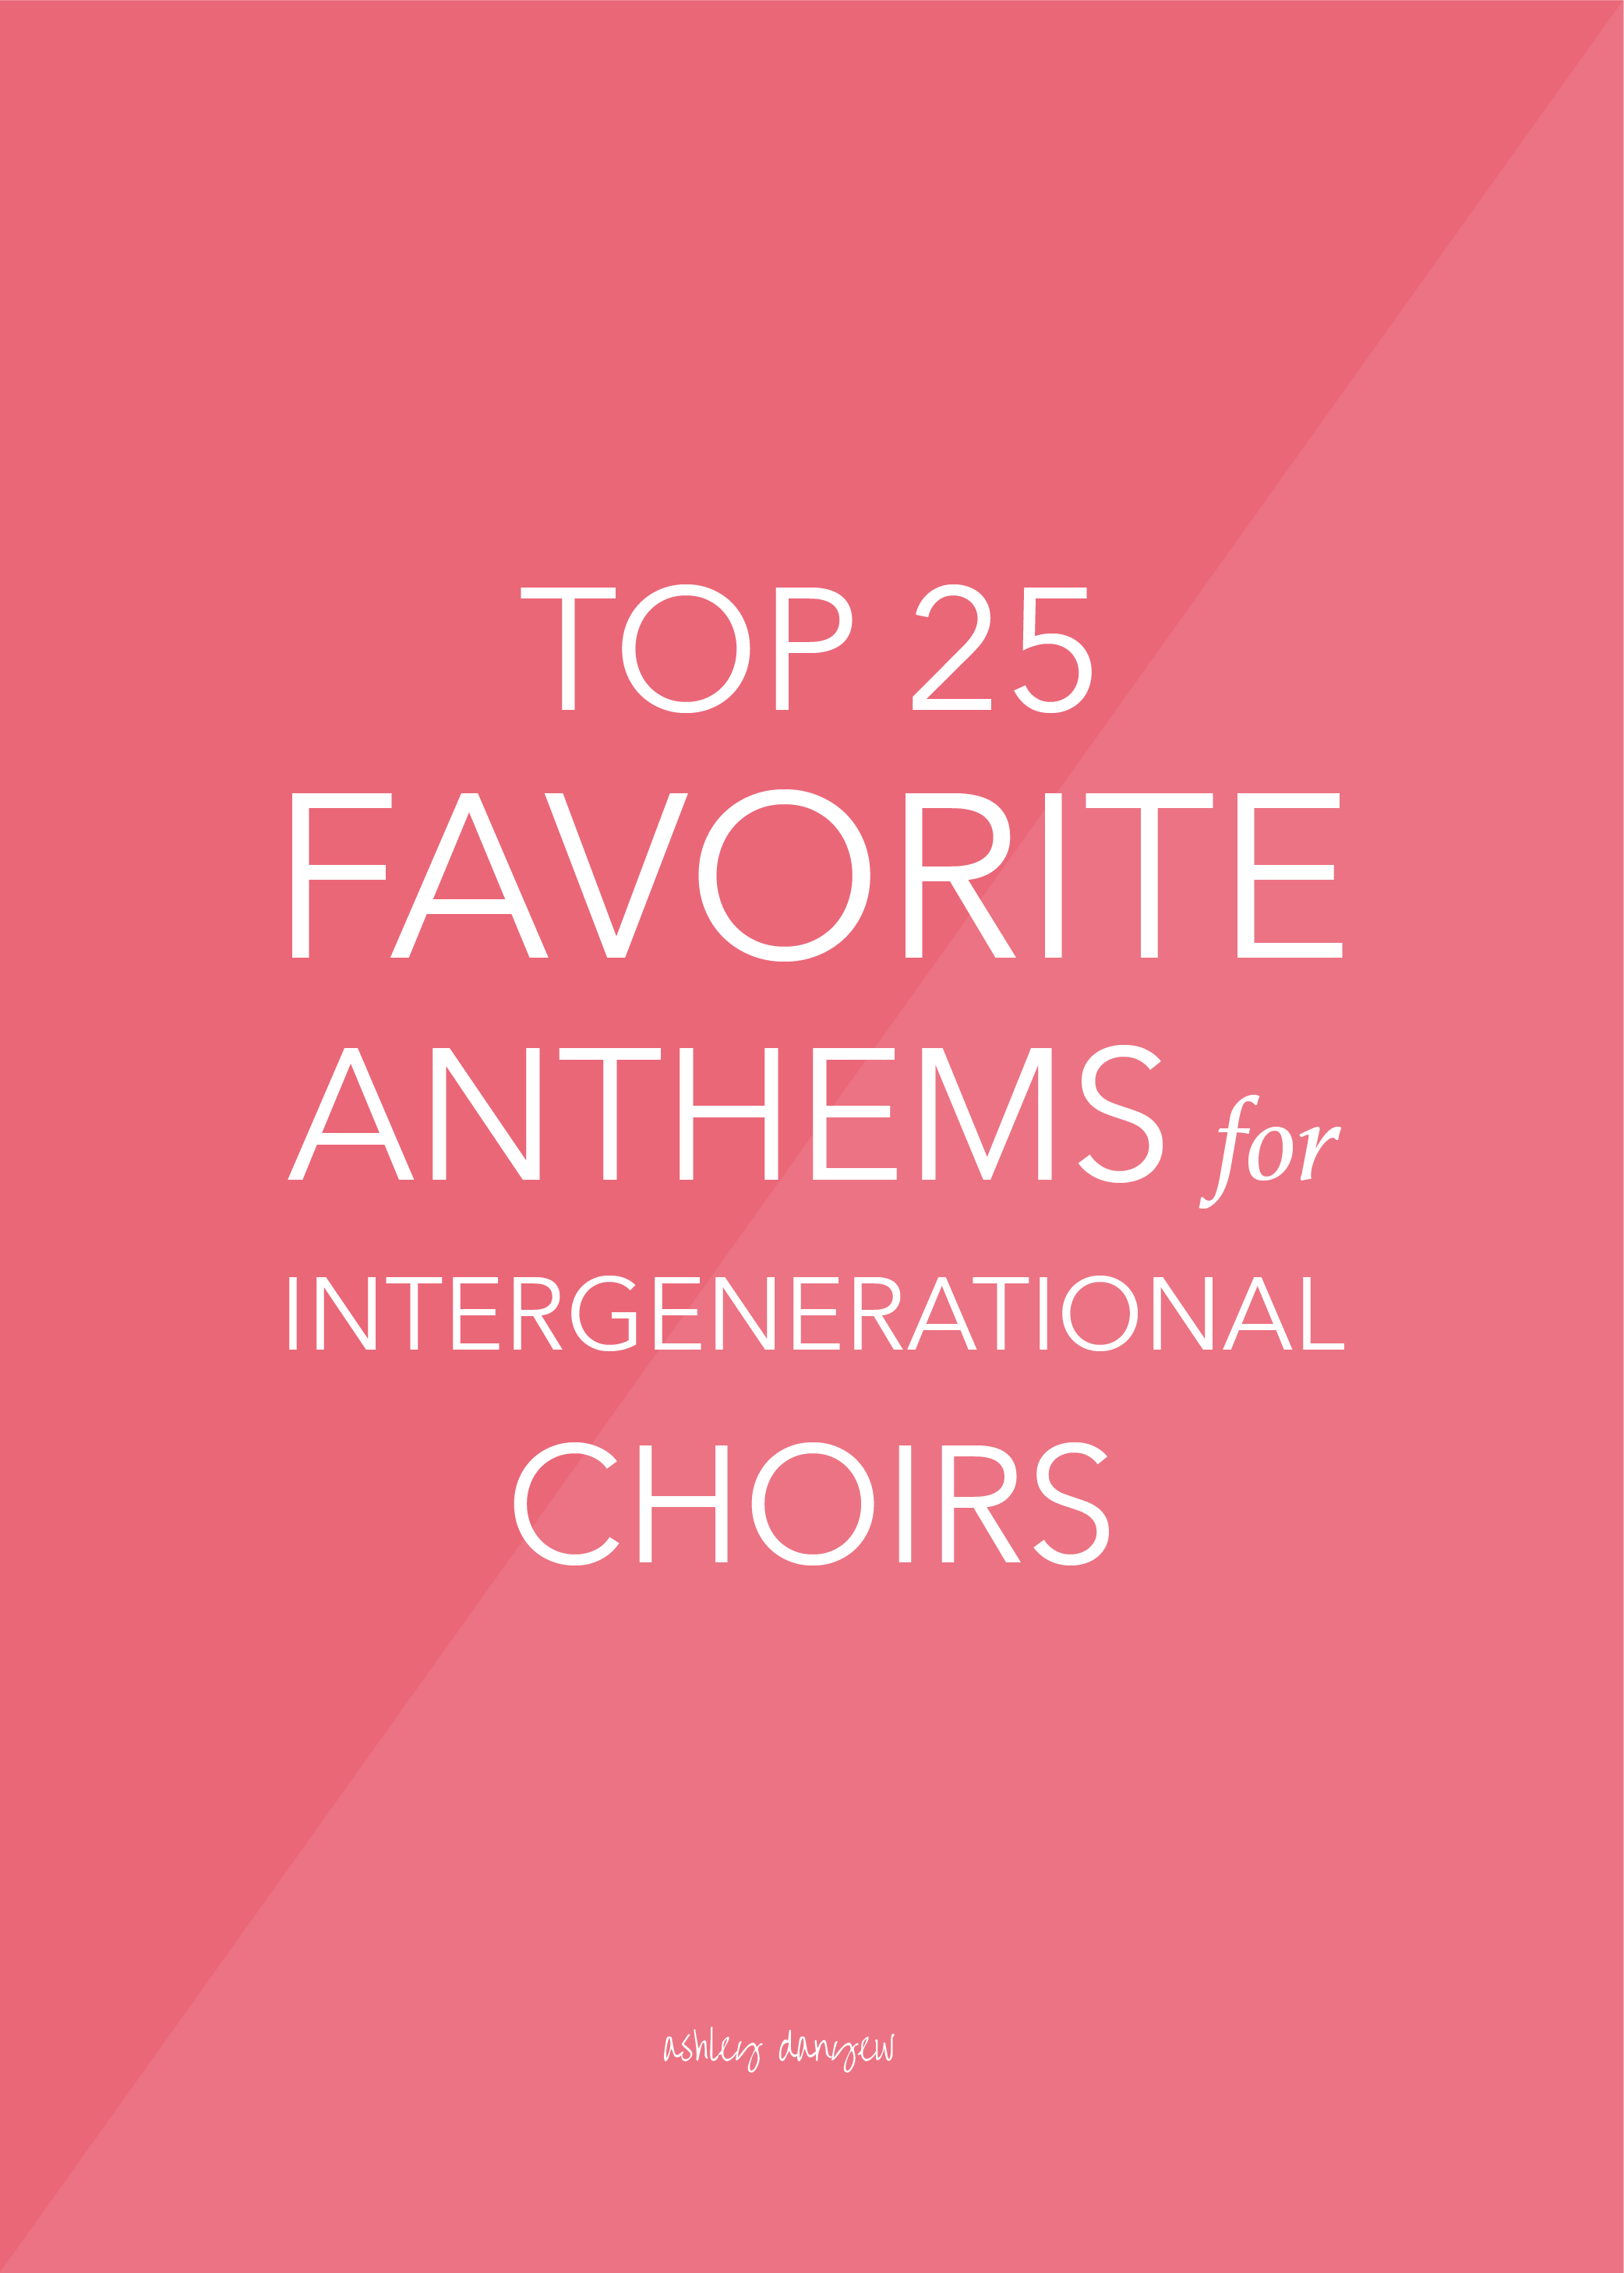 Top 25 Favorite Anthems for Intergenerational Choirs